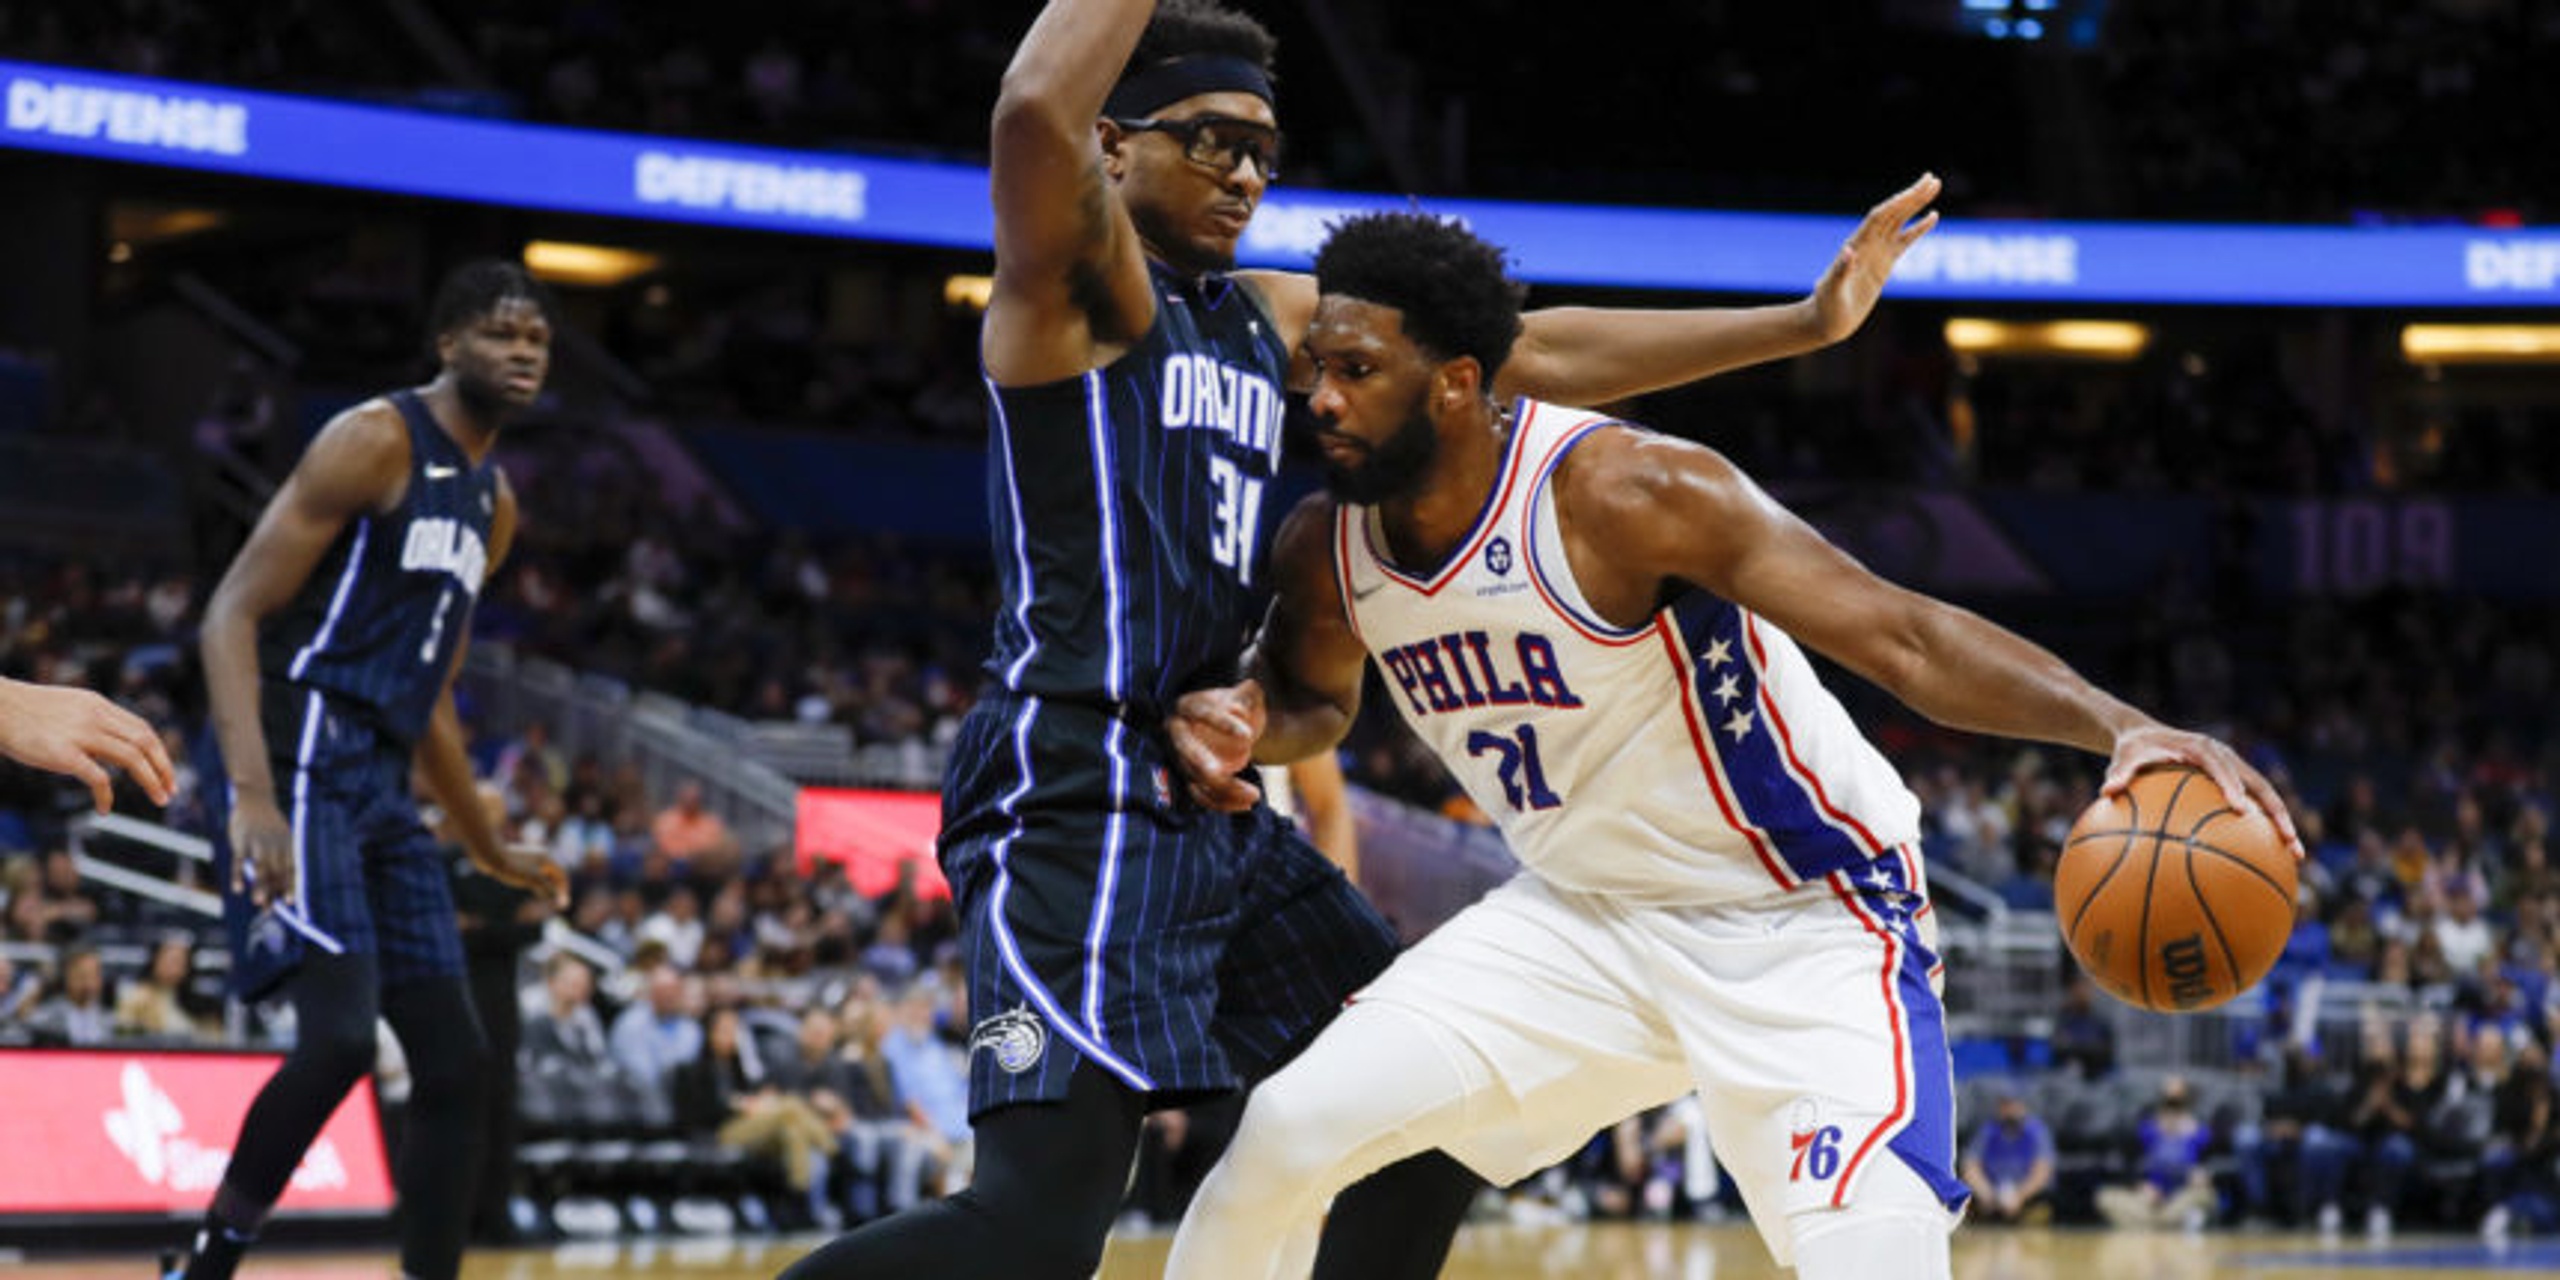 Embiid's 35 points, 16 boards lead 76ers over Magic in OT